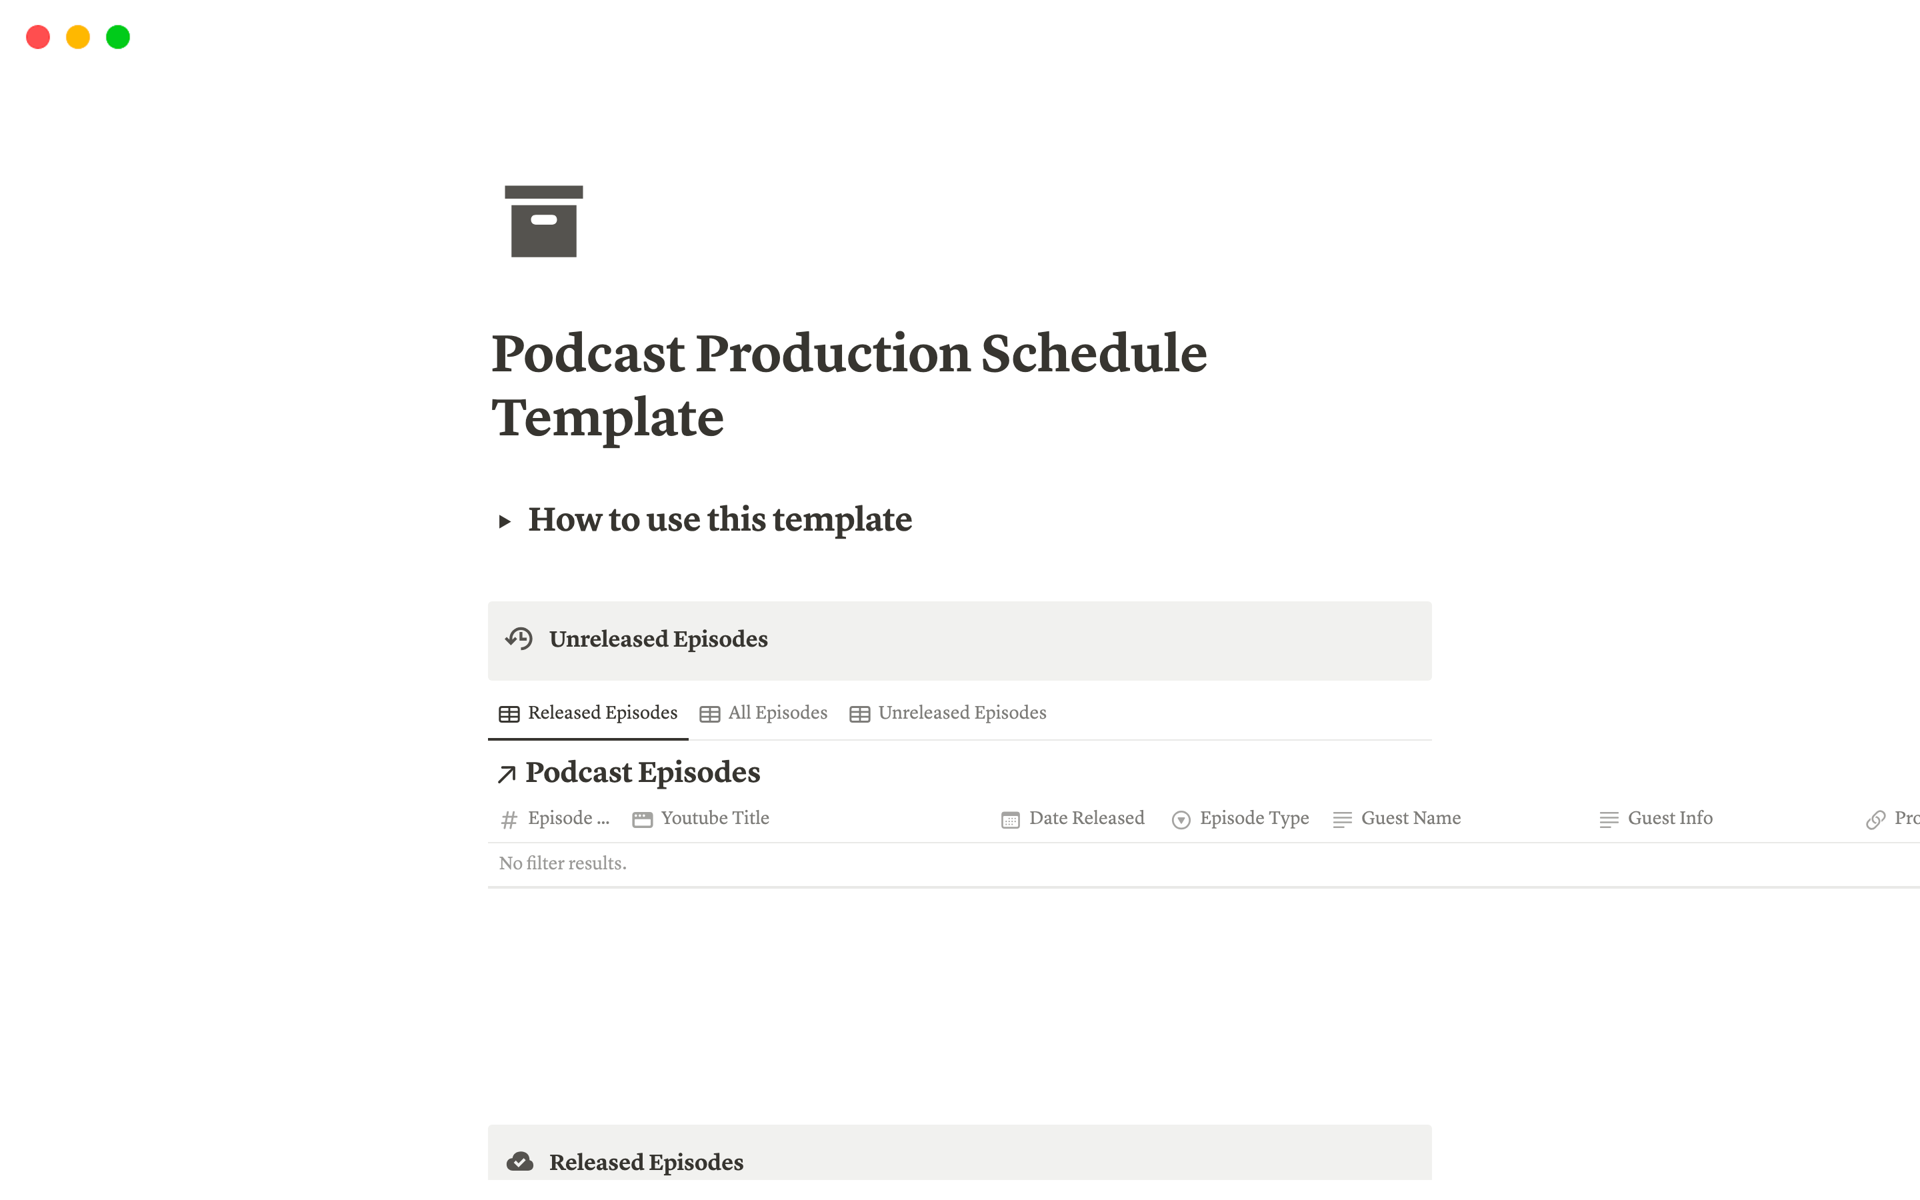 Post-production podcast template to keep episodes organized.